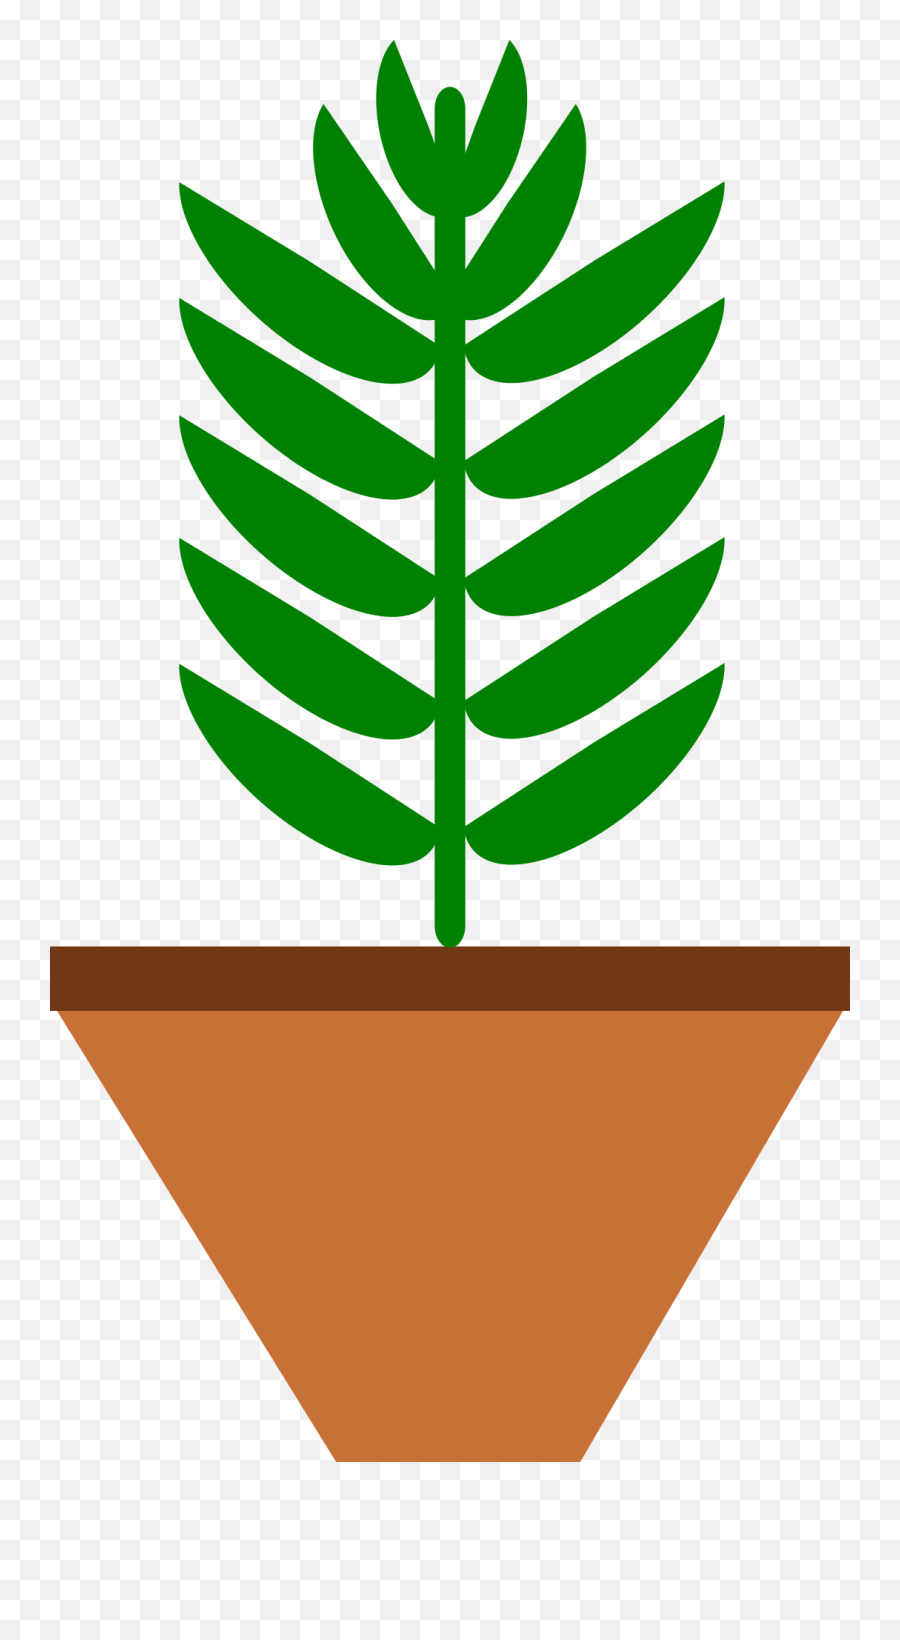 Potted Plant - Leaves Only3colorwithspaceonpot Potted Plants Icon Png Emoji,Potted Plant Emoji